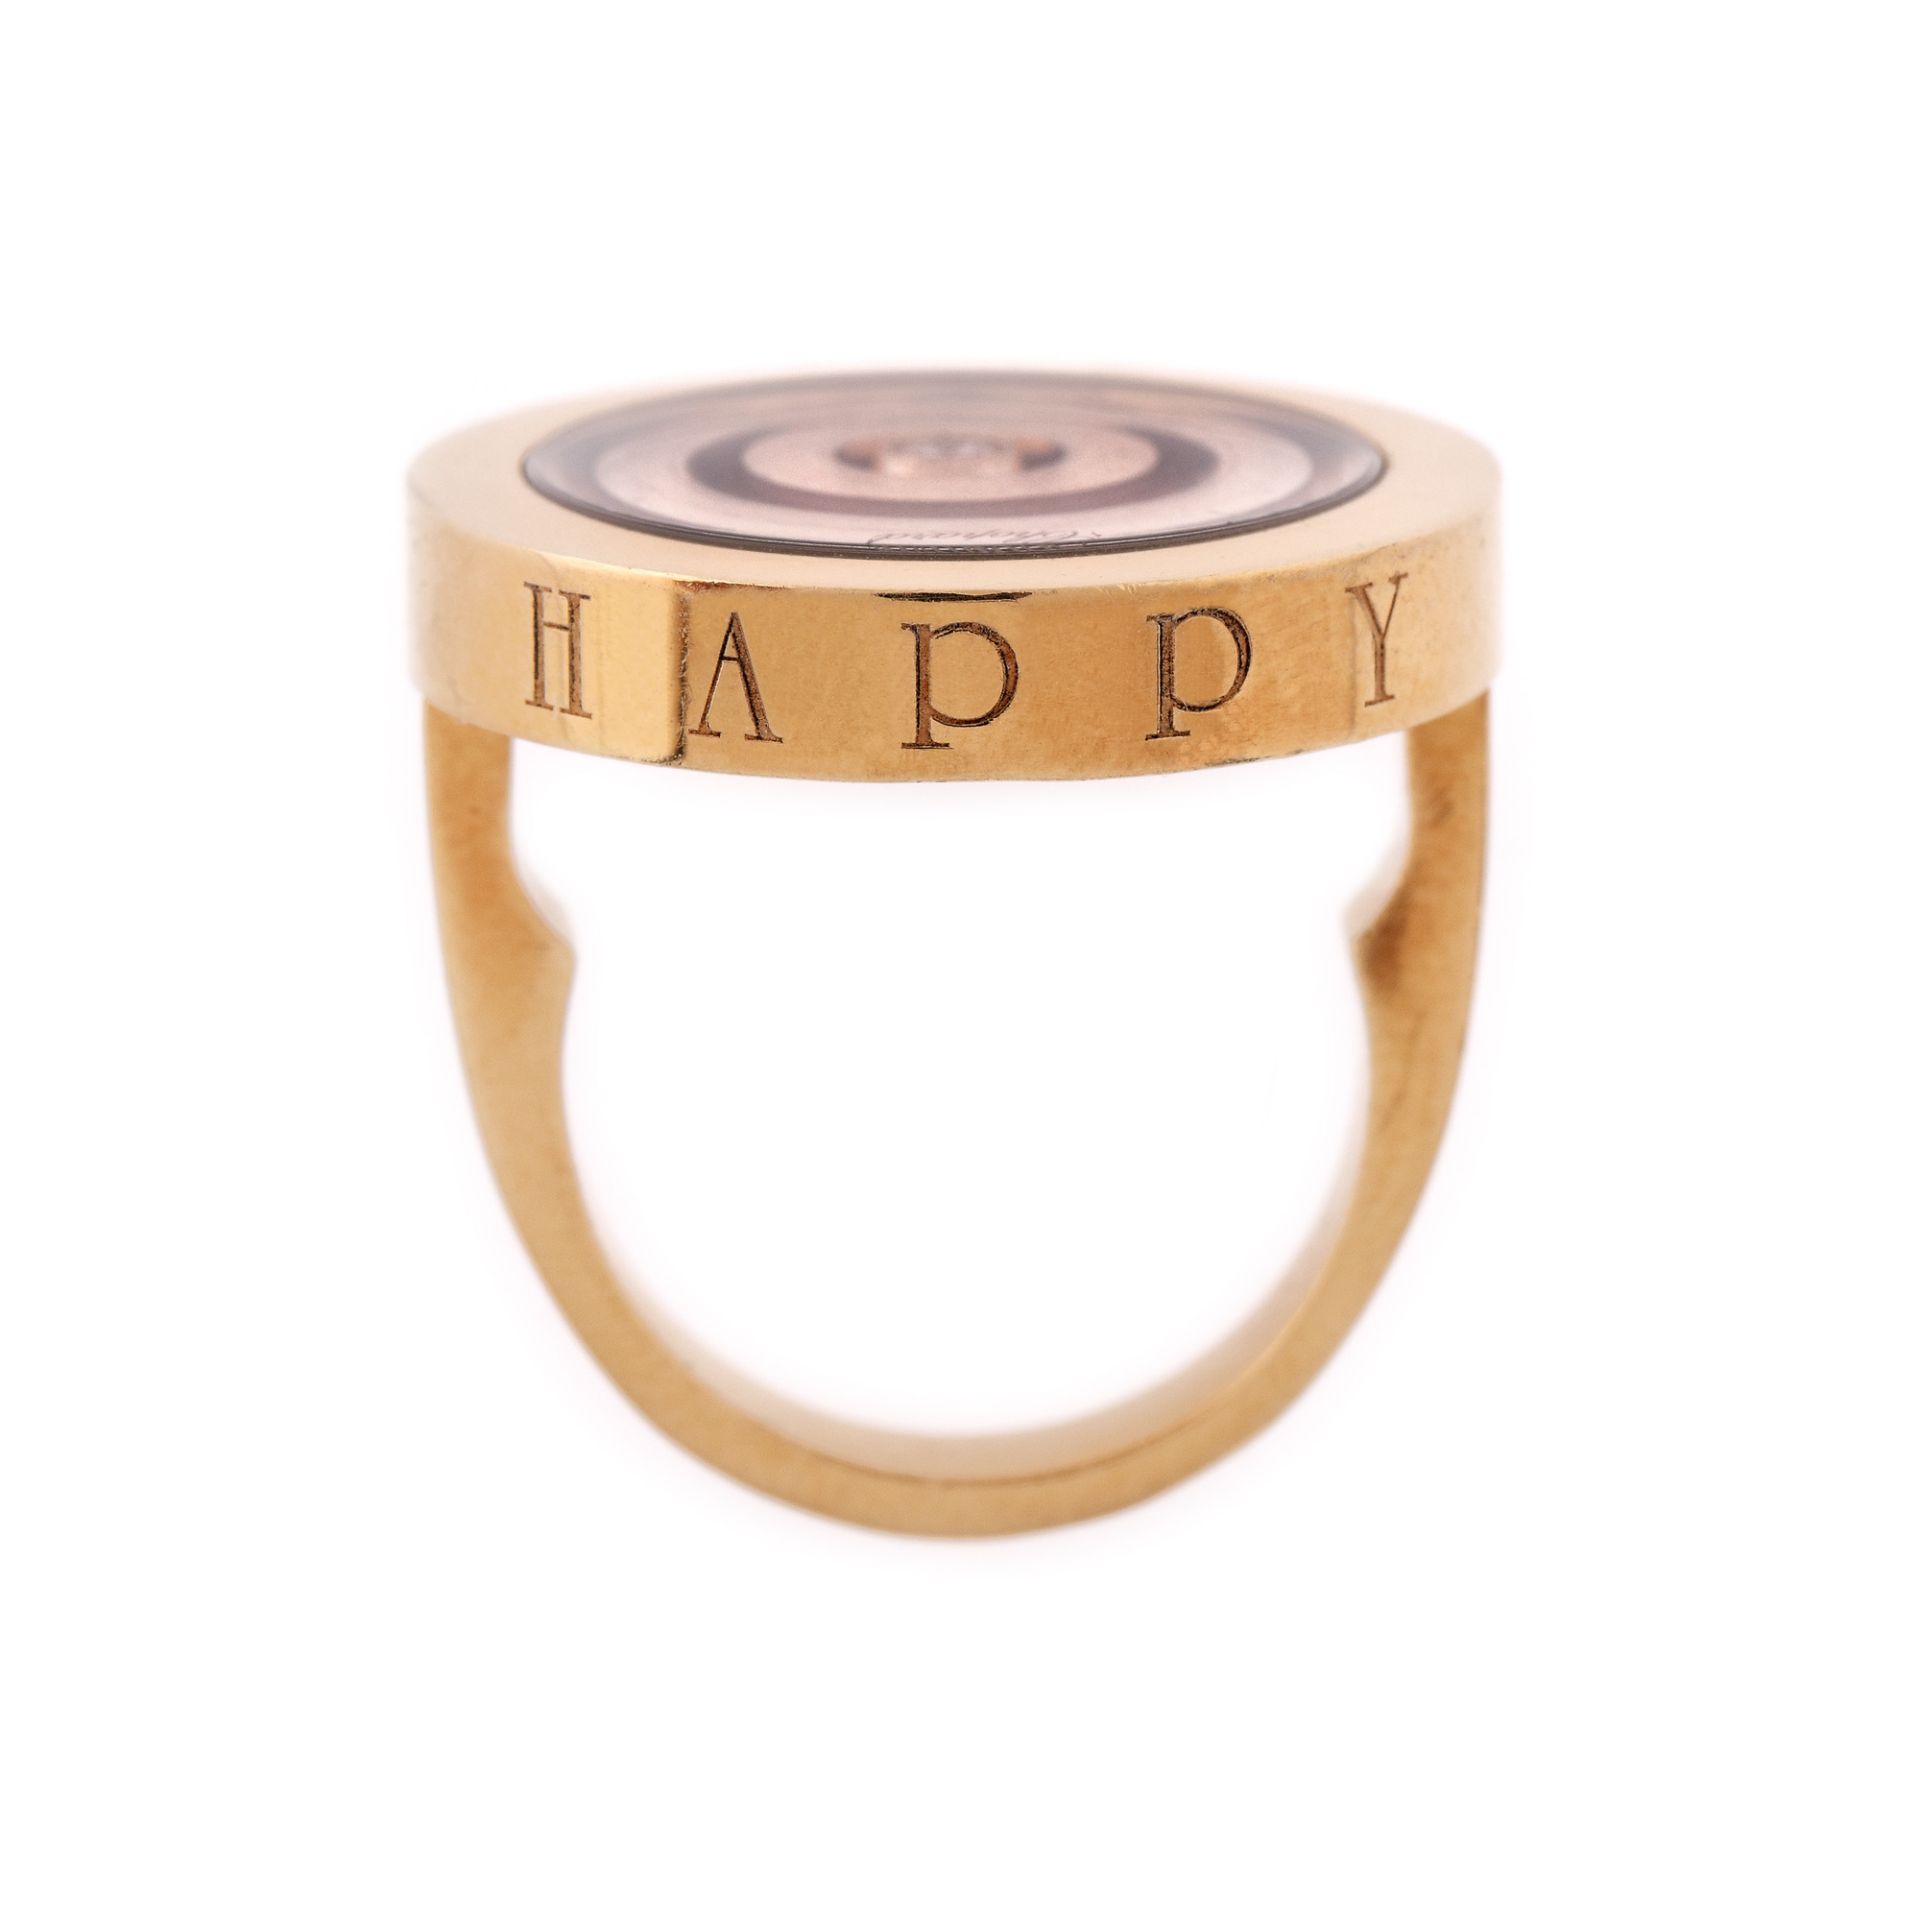 Chopard Happy Spirit gold ring, decorated with a moving diamond - Image 3 of 4